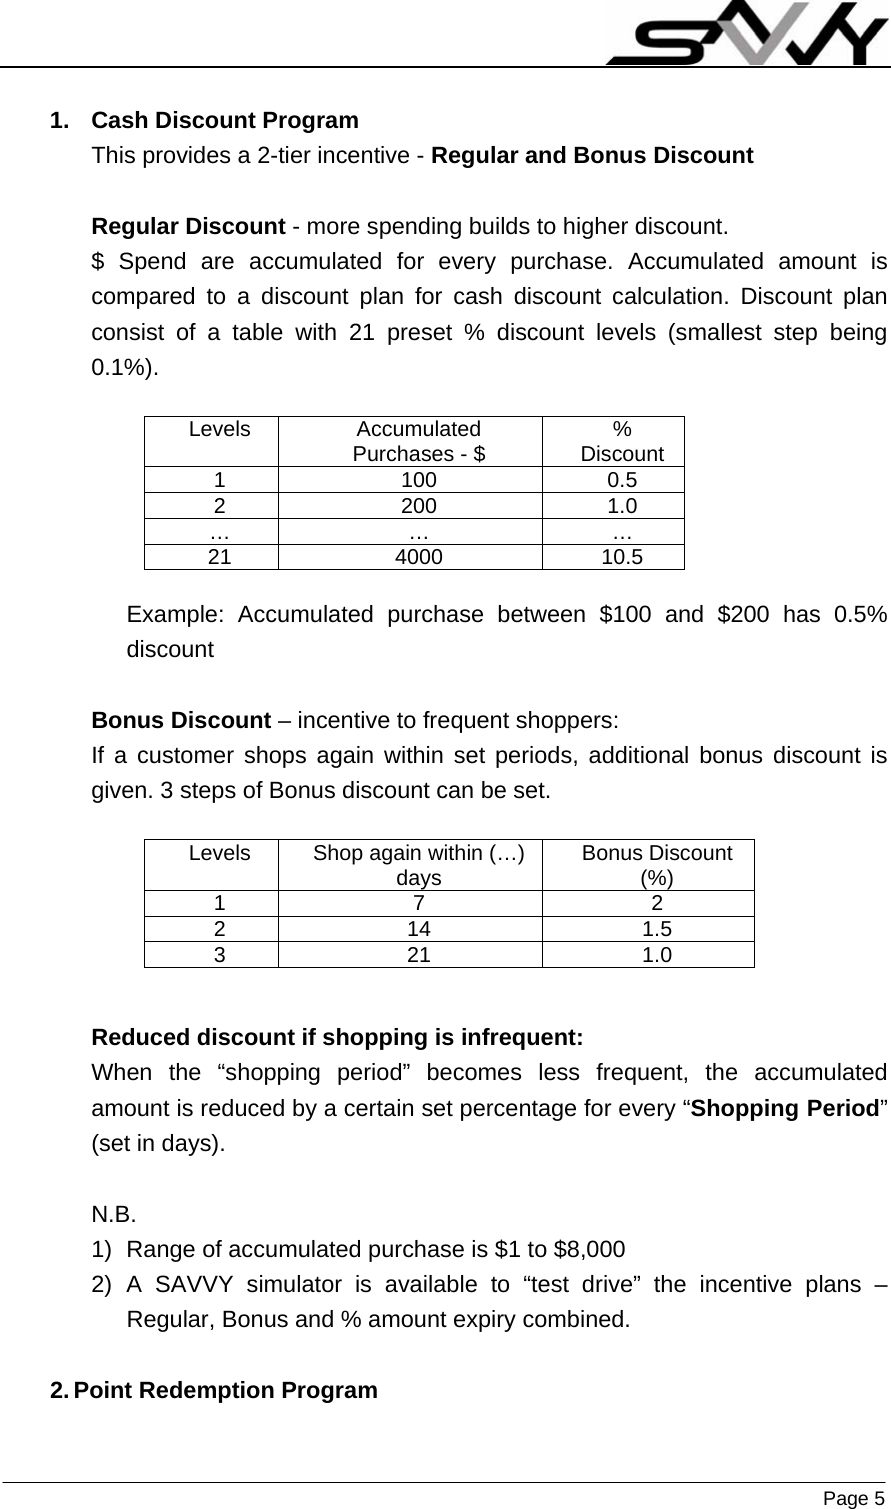                    Page 5   1. Cash Discount Program This provides a 2-tier incentive - Regular and Bonus Discount  Regular Discount - more spending builds to higher discount. $ Spend are accumulated for every purchase. Accumulated amount is compared to a discount plan for cash discount calculation. Discount plan consist of a table with 21 preset % discount levels (smallest step being 0.1%).       Example: Accumulated purchase between $100 and $200 has 0.5% discount  Bonus Discount – incentive to frequent shoppers: If a customer shops again within set periods, additional bonus discount is given. 3 steps of Bonus discount can be set.       Reduced discount if shopping is infrequent: When the “shopping period” becomes less frequent, the accumulated amount is reduced by a certain set percentage for every “Shopping Period” (set in days).  N.B. 1)  Range of accumulated purchase is $1 to $8,000 2) A SAVVY simulator is available to “test drive” the incentive plans – Regular, Bonus and % amount expiry combined.  2. Point Redemption Program Levels Accumulated Purchases - $  % Discount 1 100 0.5 2 200 1.0 … …  … 21 4000 10.5 Levels  Shop again within (…) days  Bonus Discount (%) 1 7  2 2 14  1.5 3 21  1.0 